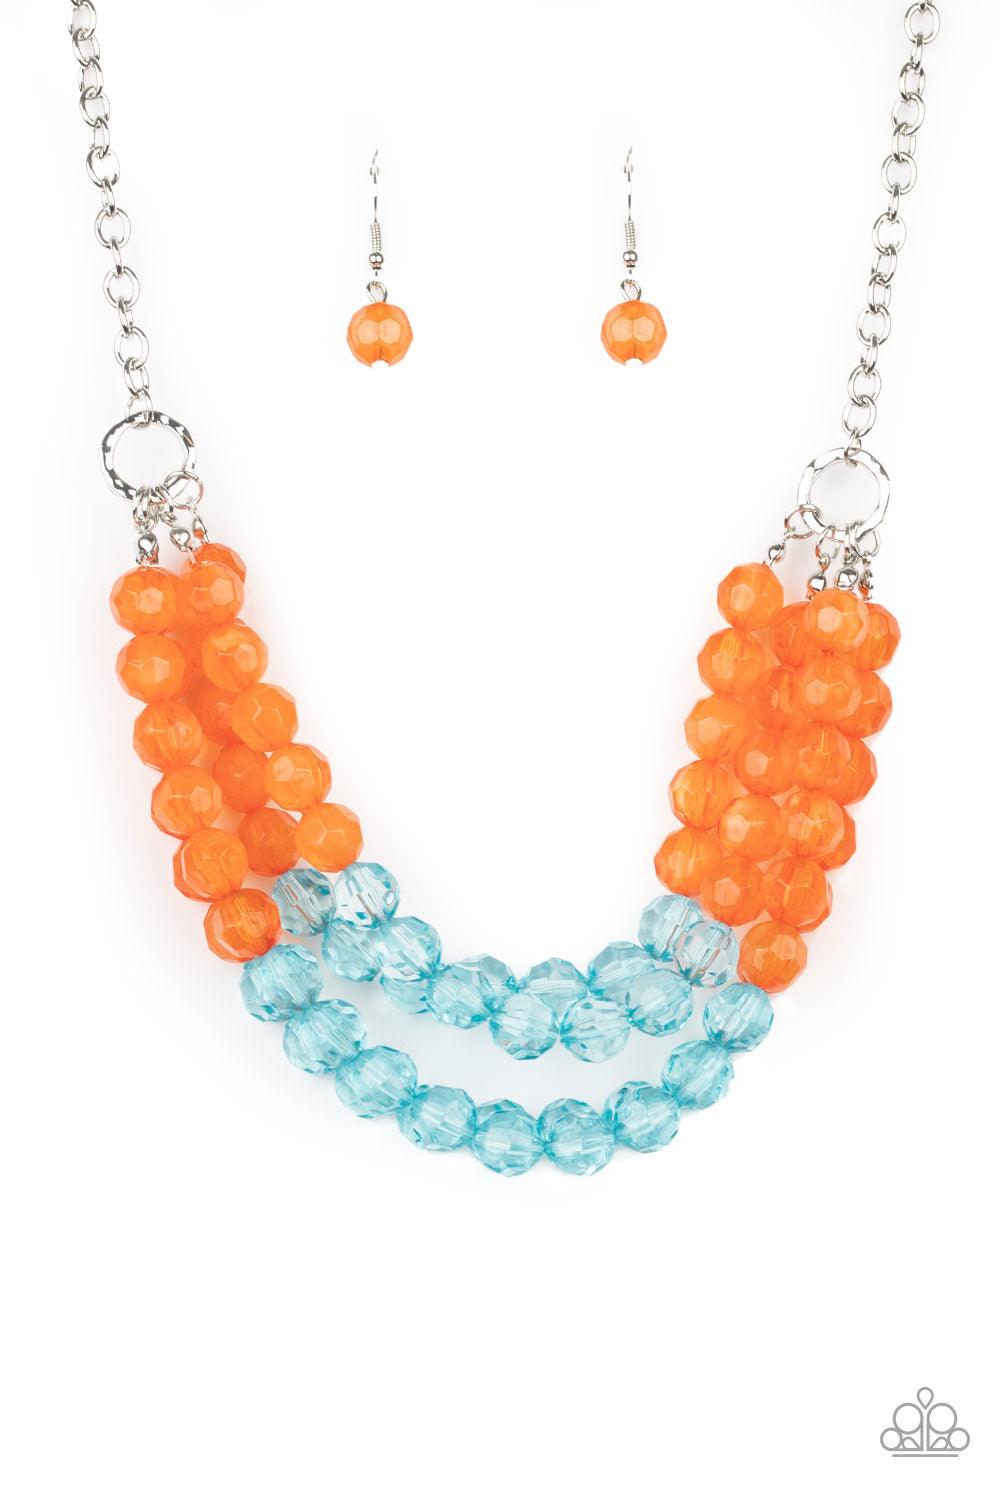 Paparazzi Accessories Summer Ice - Orange Featuring cloudy and glassy finishes, strands of faceted orange and blue crystal-like beads alternate below the collar, creating colorfully icy layers. Features an adjustable clasp closure. Jewelry